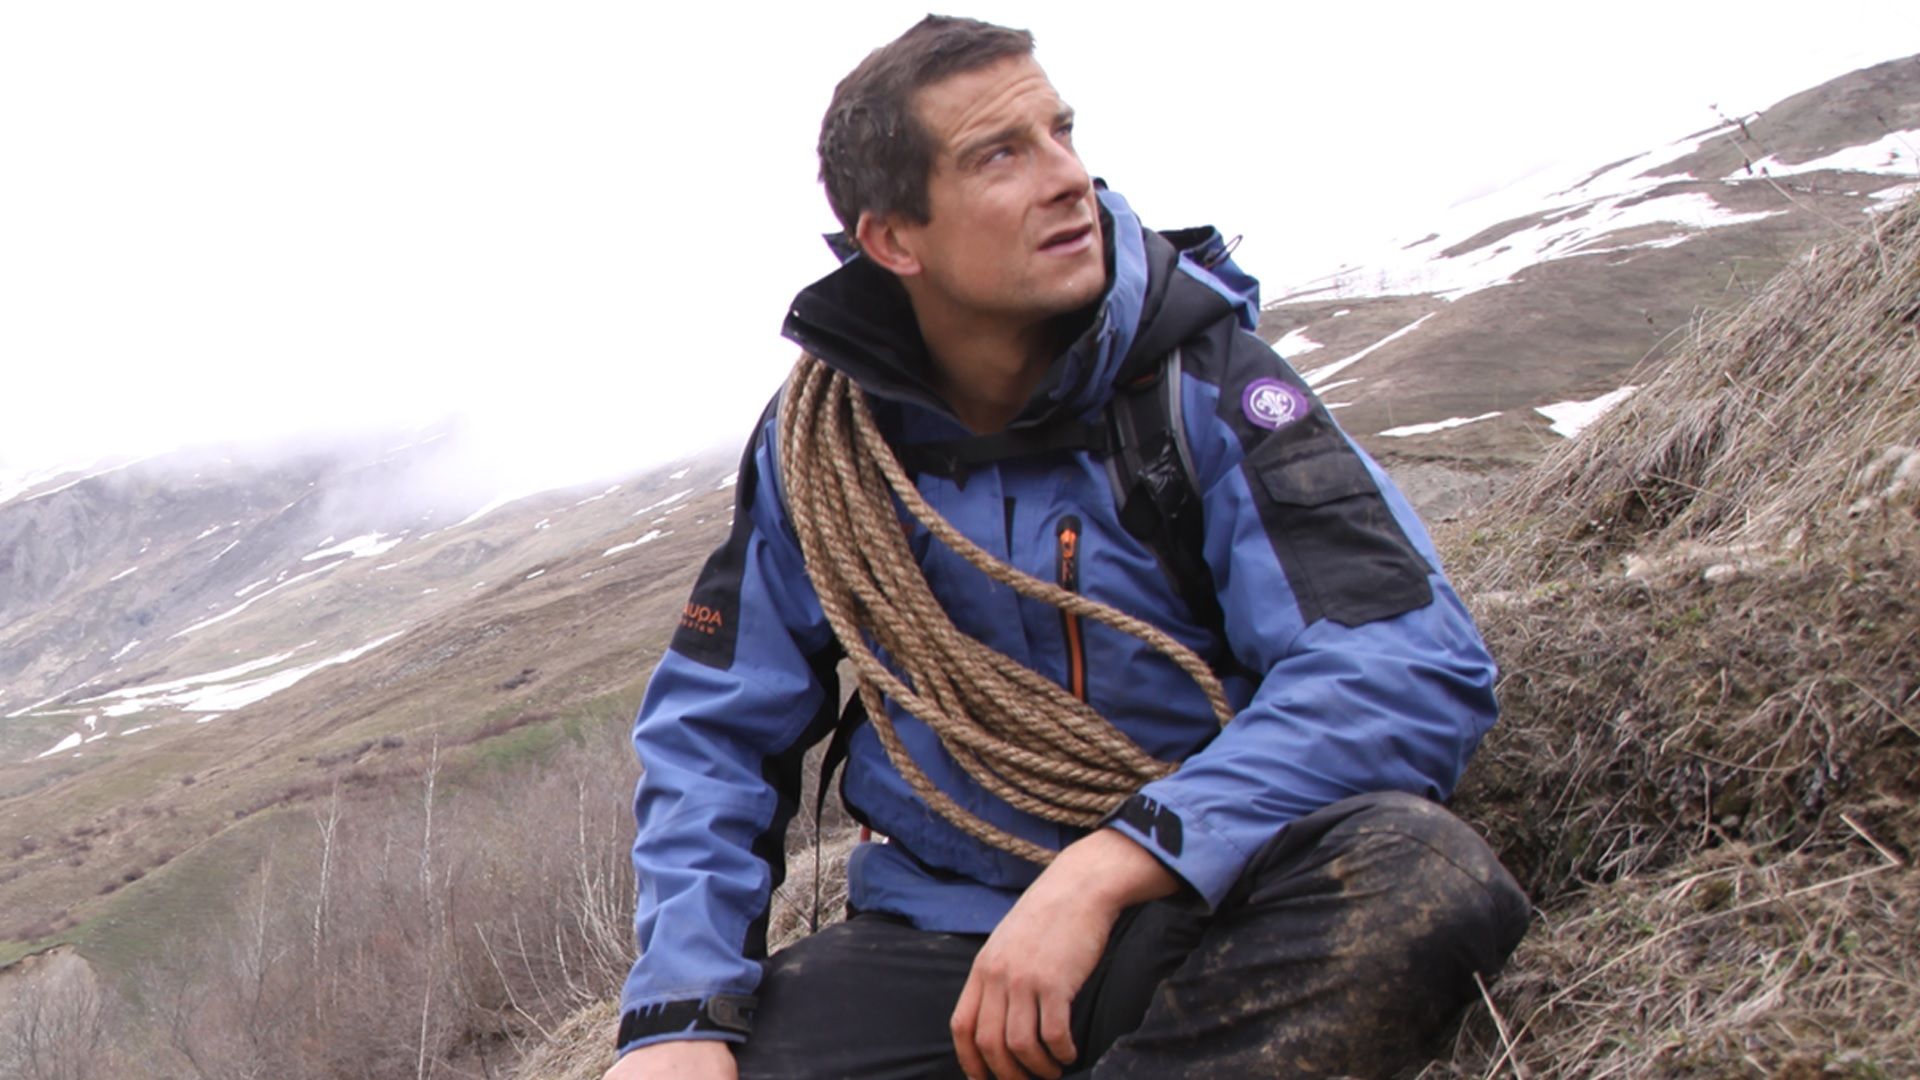 Bear Grylls with his safety equipment used on Man vs Wild.